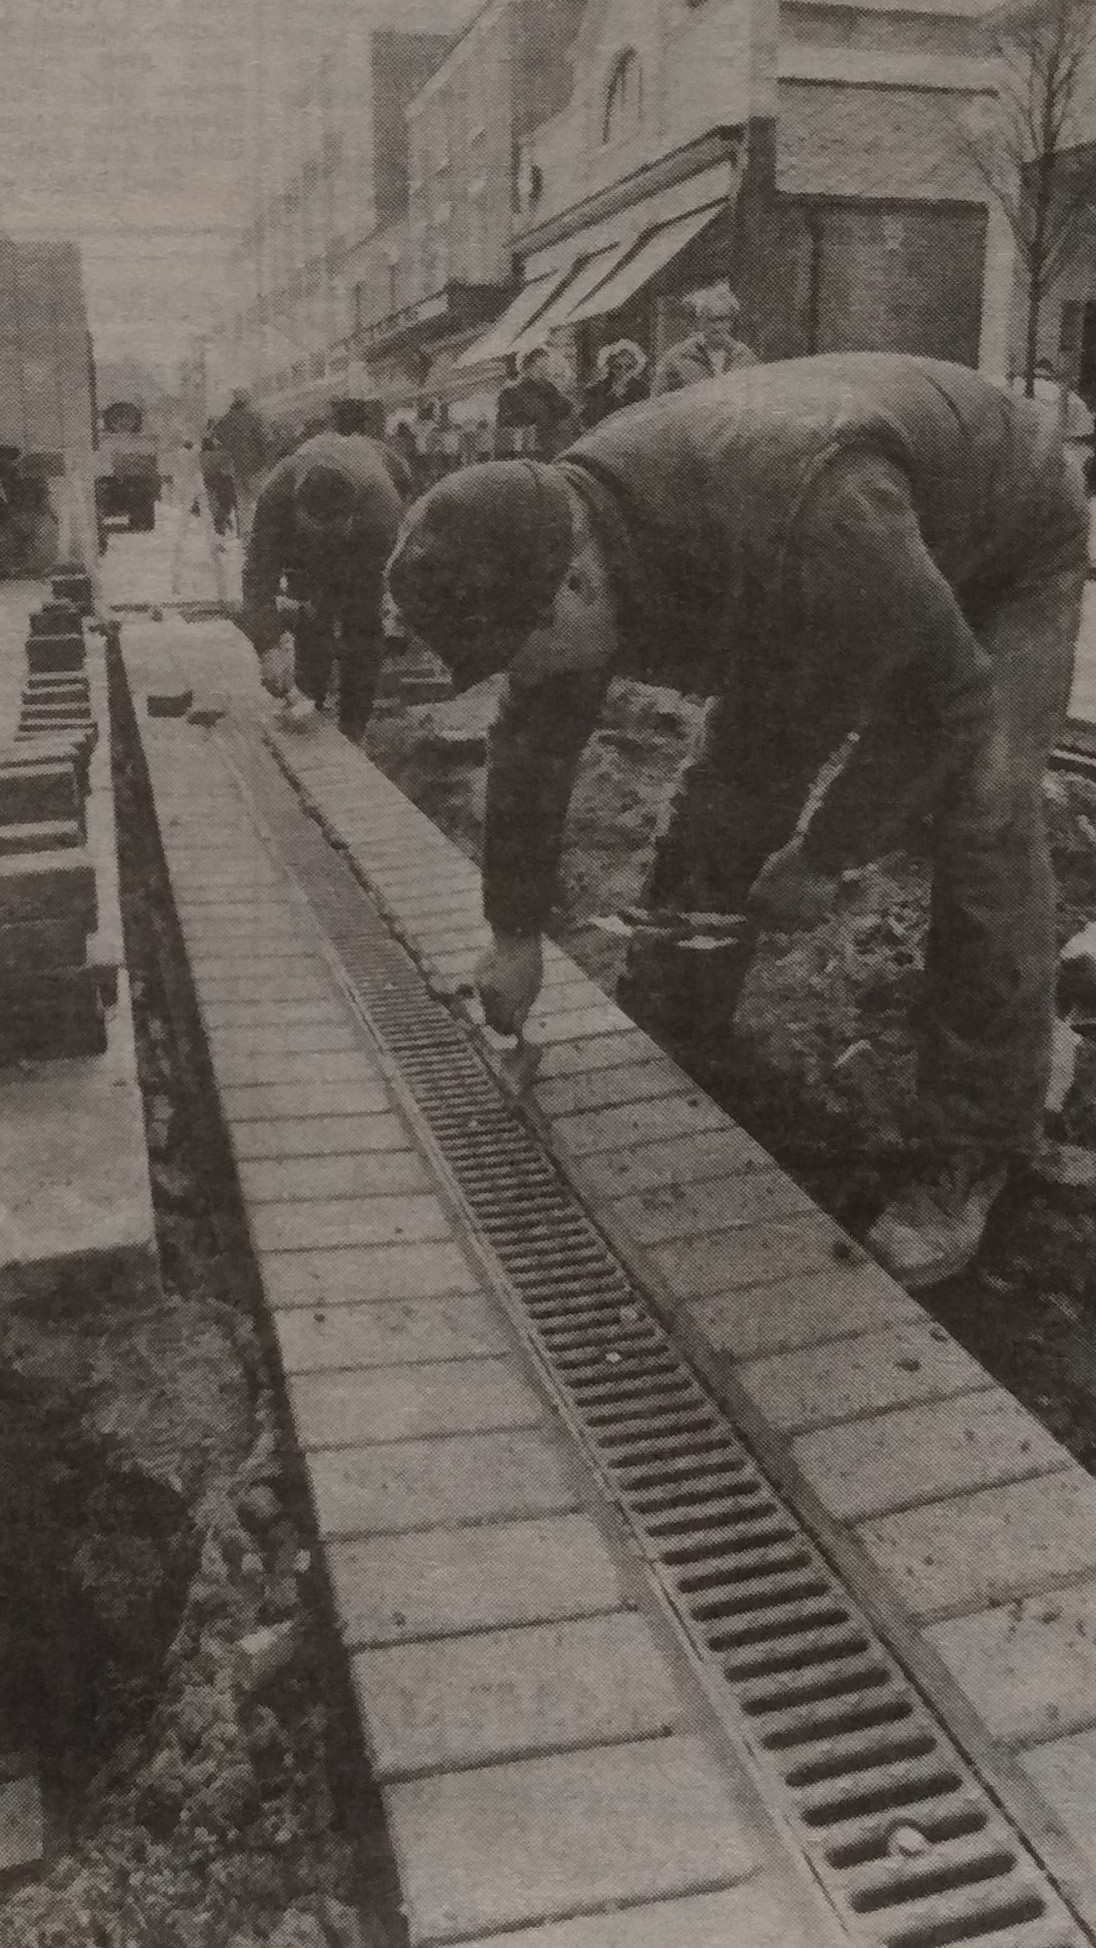 Repair work in March 1991 heralded a new era for The Shambles, councl leaders having spent almost £50,000 in repairs and improvements to the paving laid only four years prior at a cost of £100,000